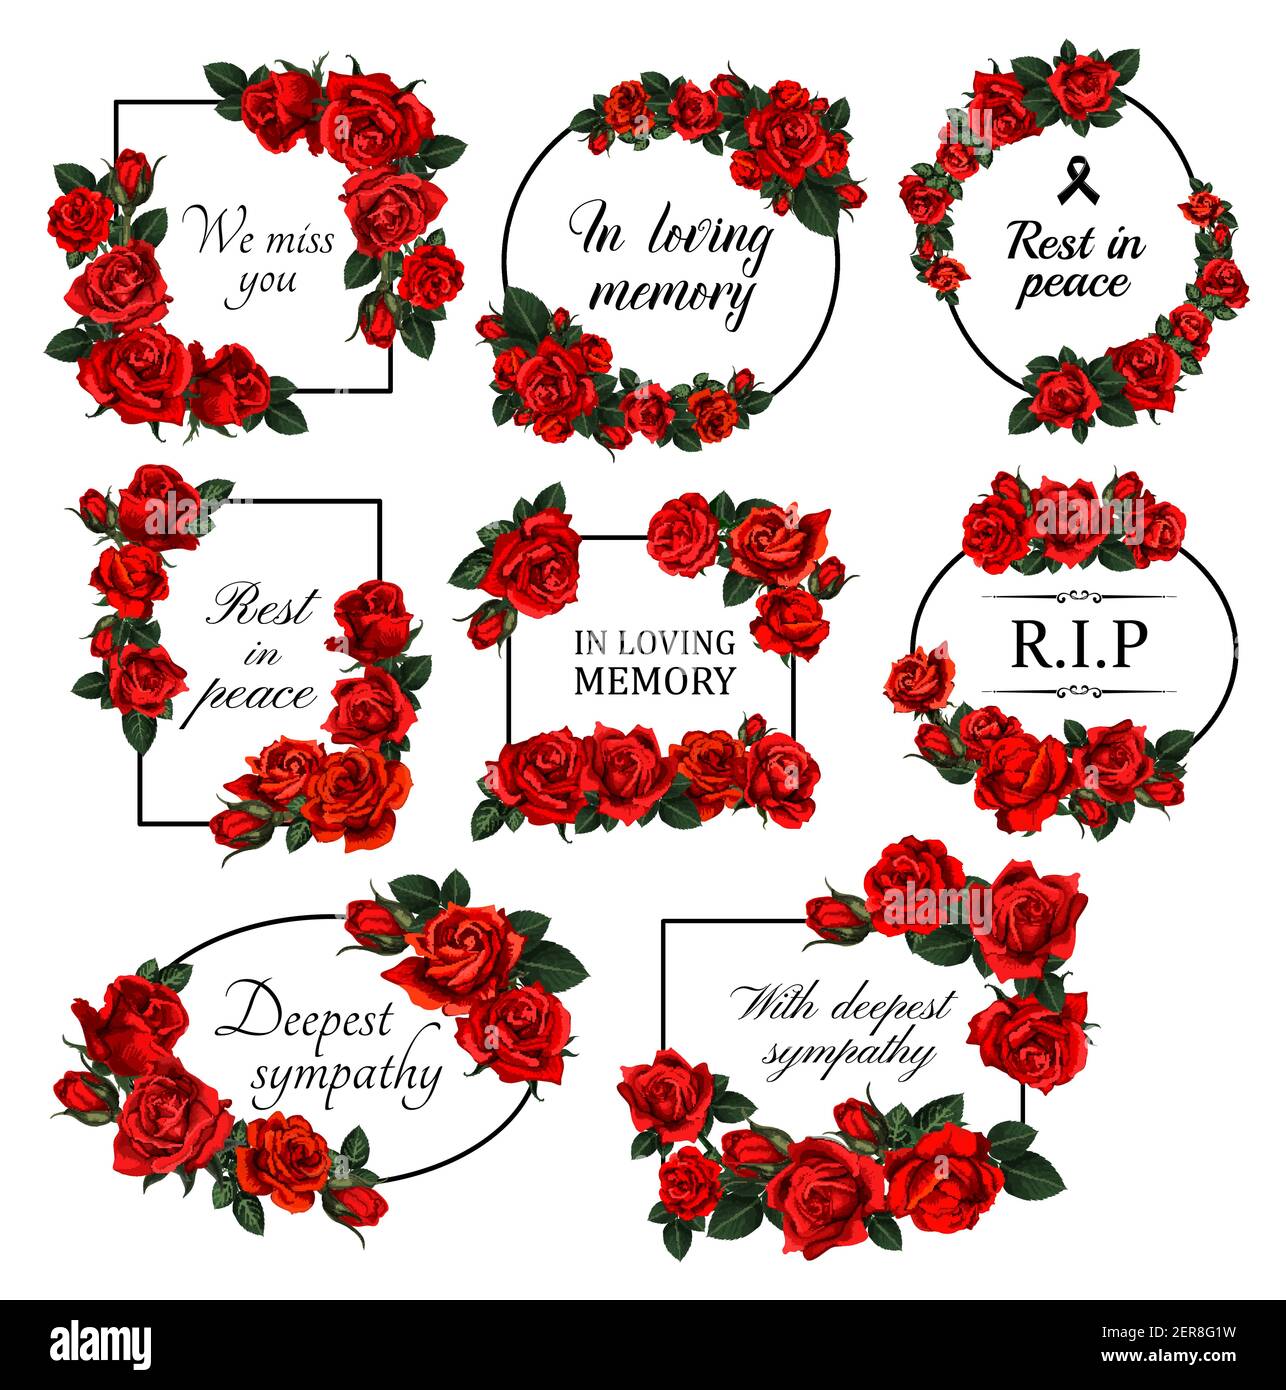 Funereal floral borders with red roses. Mourning card decor with roses flowers, leaves and buds engraved vector. Funerary frame with floral arrangemen Stock Vector